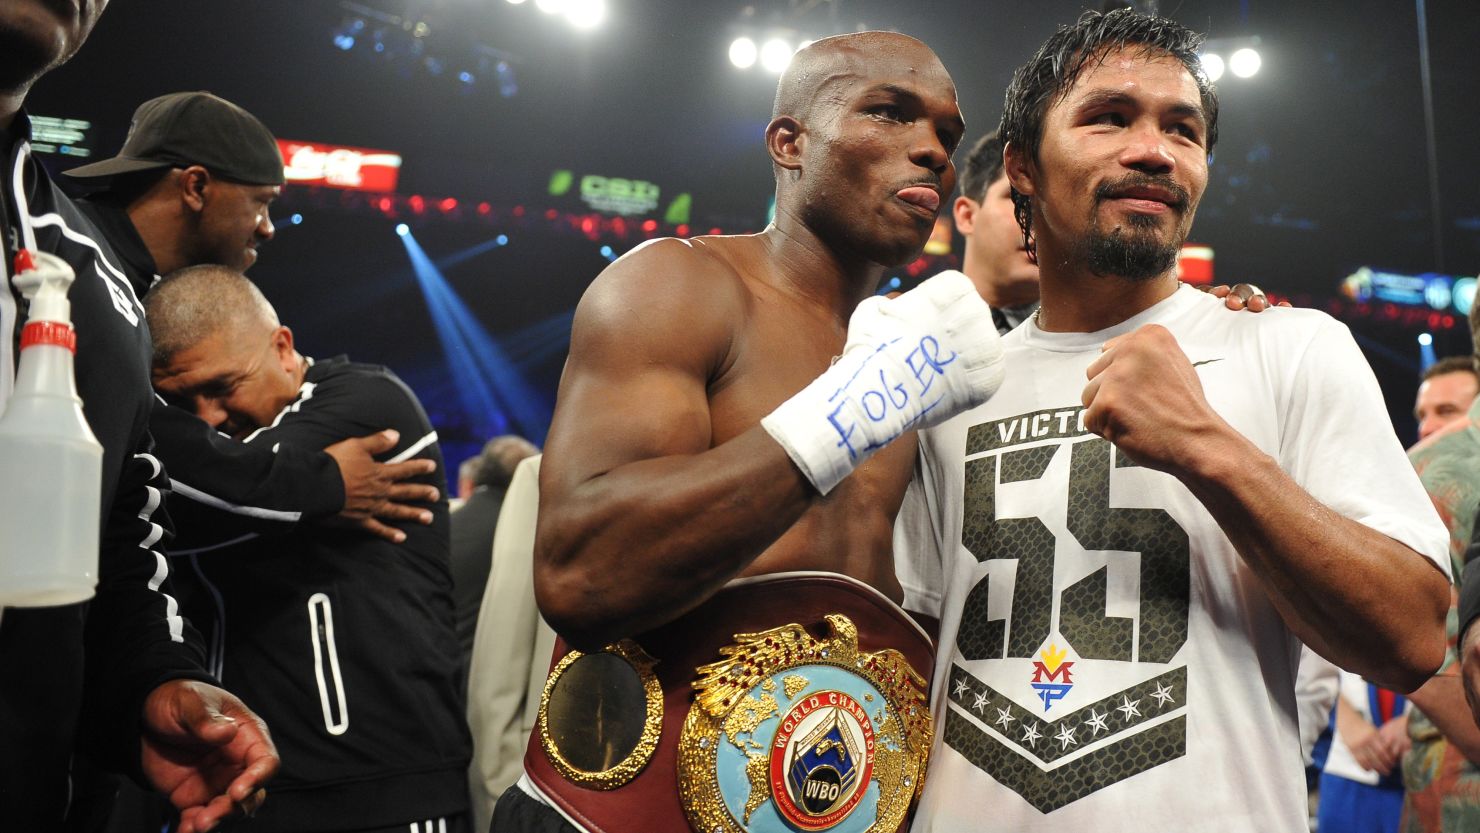 Timothy Bradley, left, celebrates his victory over Manny Pacquiao after their WBO welterweight title match.